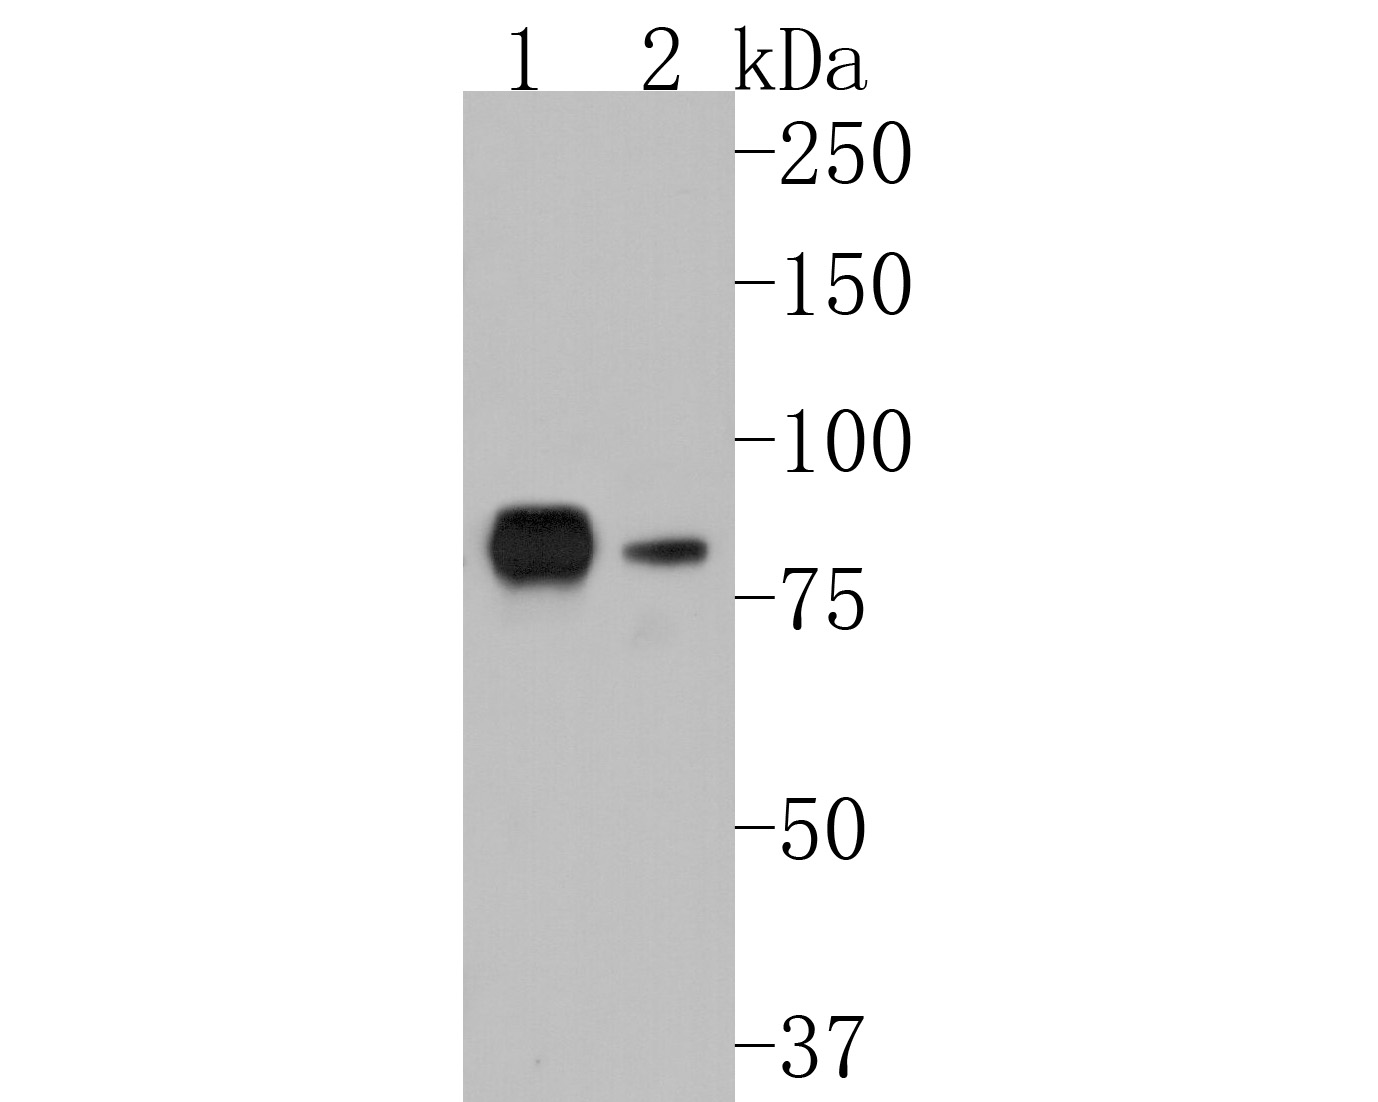 Western blot analysis of GRK2 on different lysates. Proteins were transferred to a PVDF membrane and blocked with 5% BSA in PBS for 1 hour at room temperature. The primary antibody (ET1609-72, 1/500) was used in 5% BSA at room temperature for 2 hours. Goat Anti-Rabbit IgG - HRP Secondary Antibody (HA1001) at 1:5,000 dilution was used for 1 hour at room temperature.<br />
Positive control: <br />
Lane 1: Raji cell lysate<br />
Lane 2: Hela cell lysate